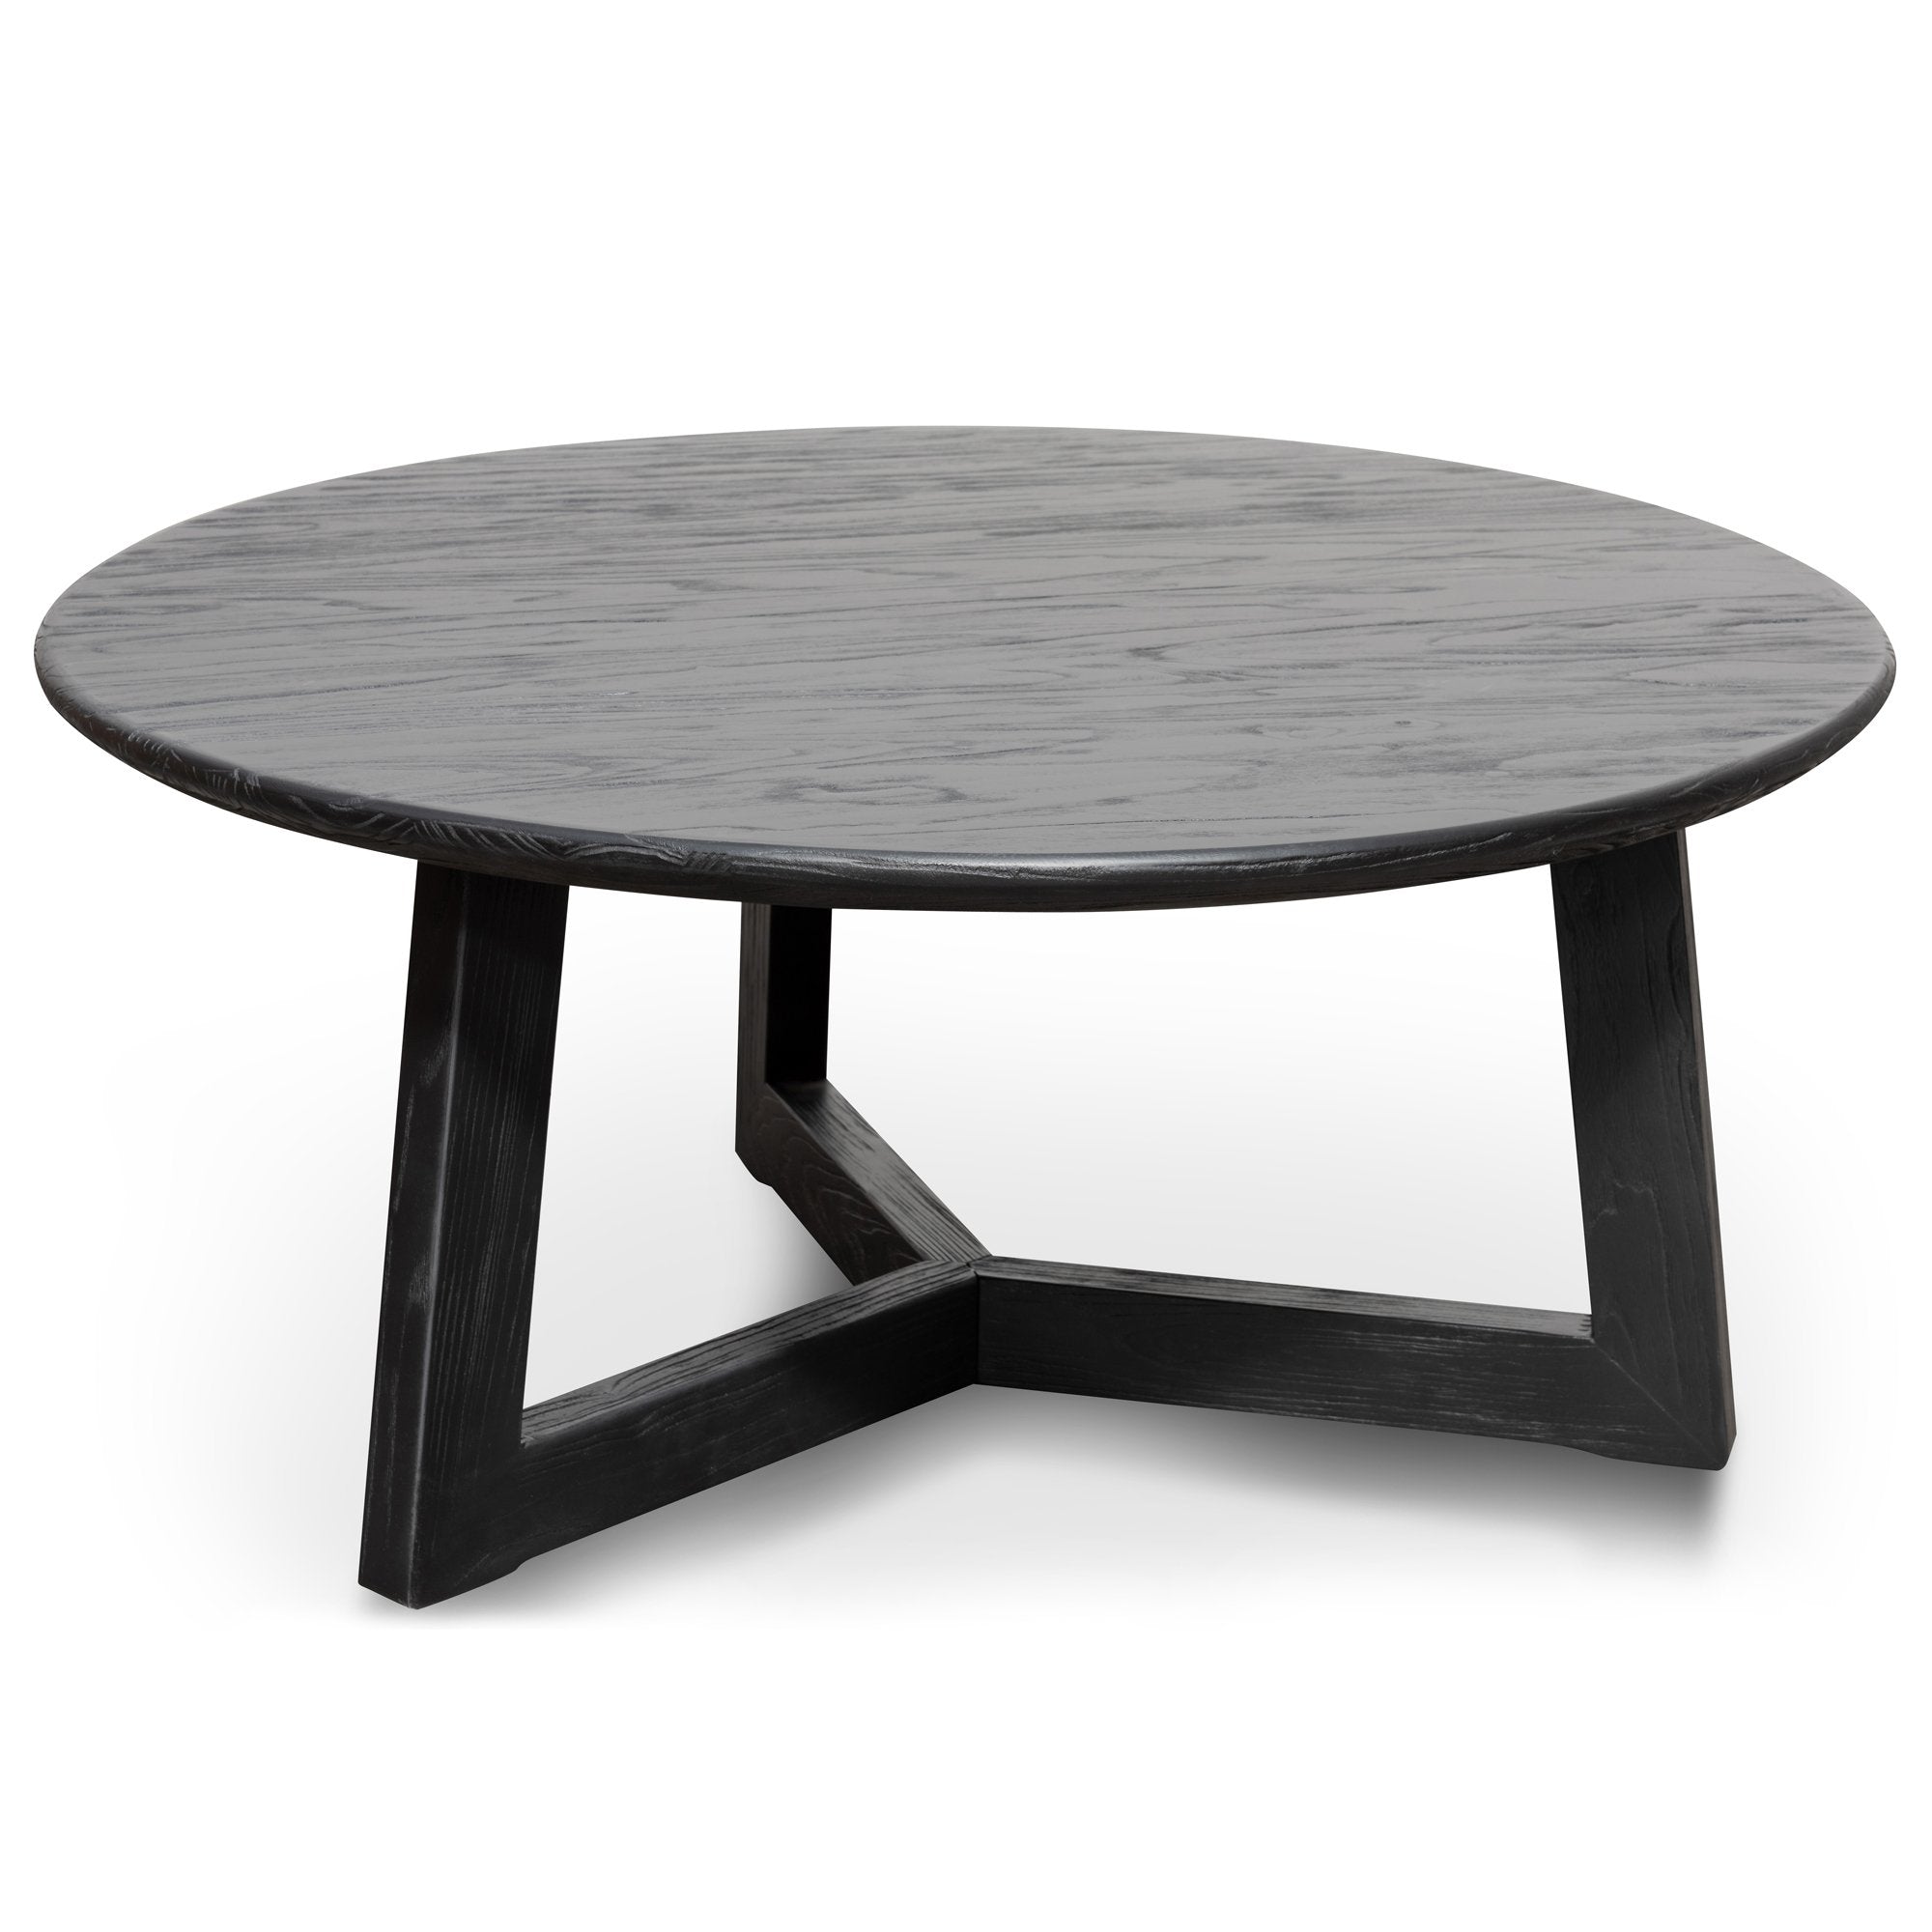 Get Round Black Oak Coffee Table Images